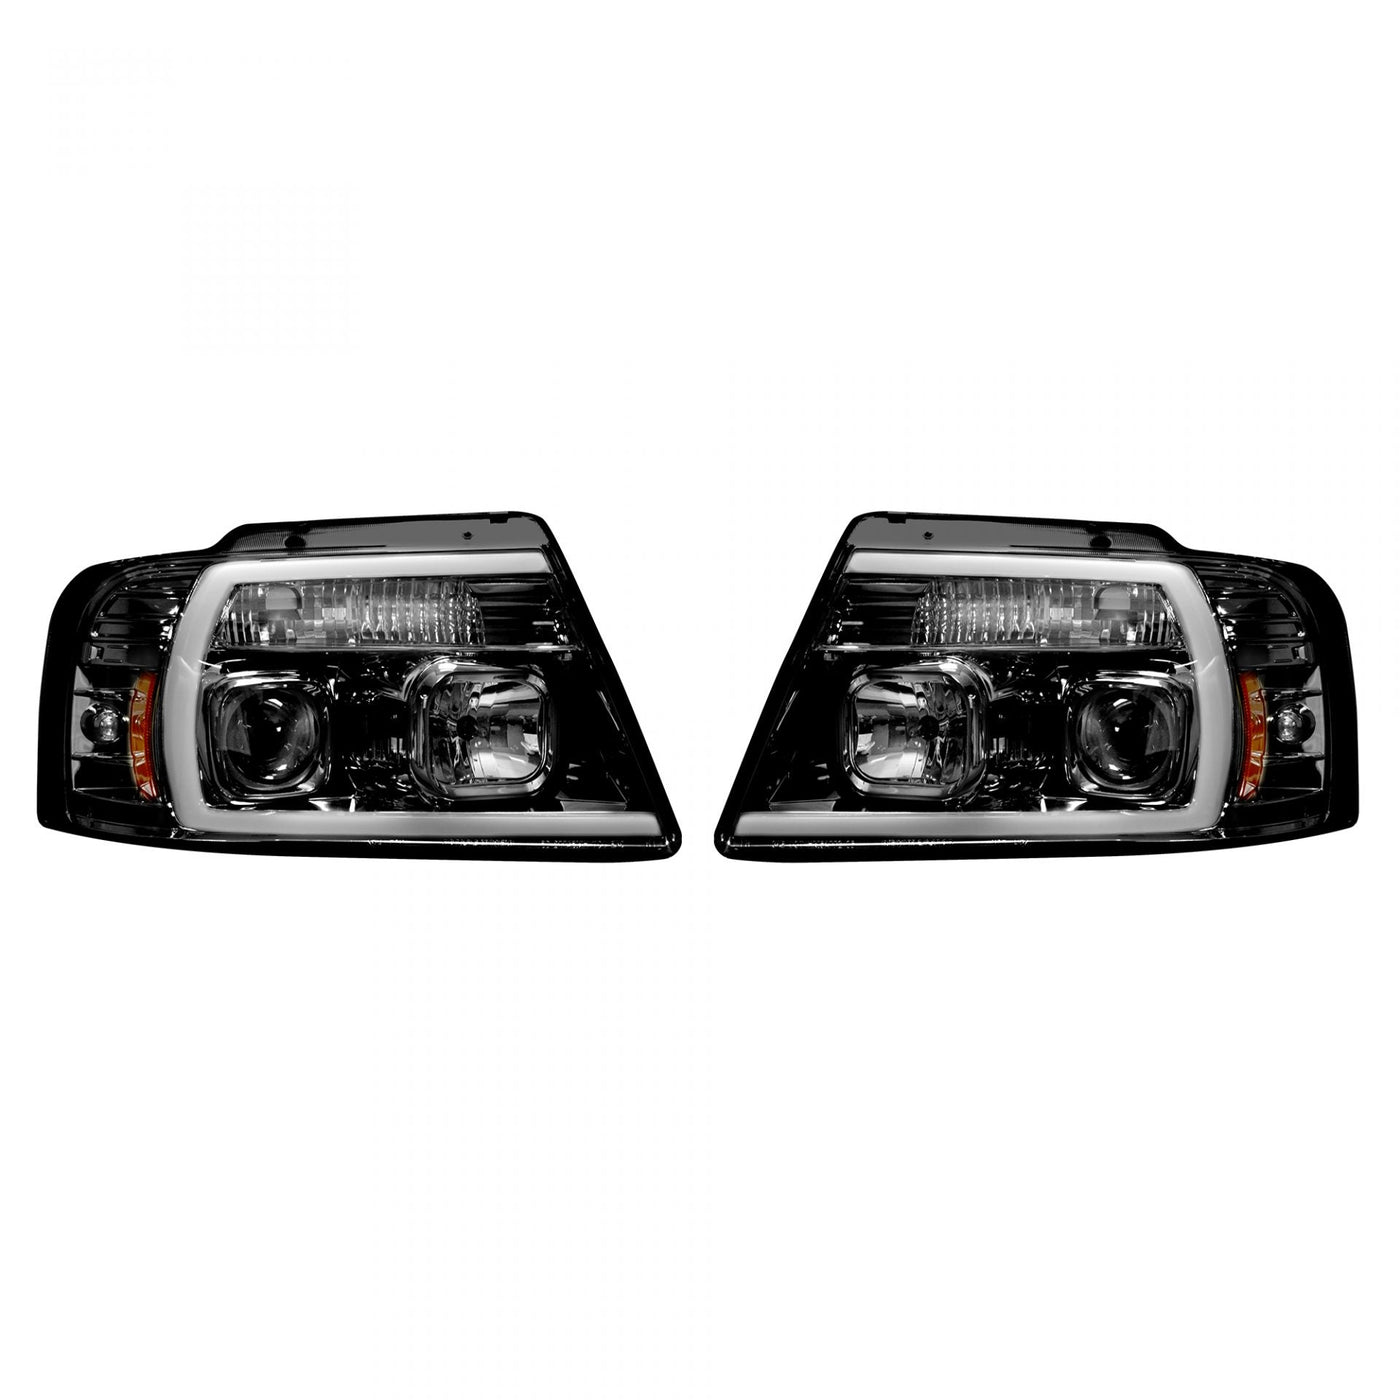 Ford Projector Headlights, F150 Projector Headlights, F150 04-08 Projector Headlights, Smoked/Black Headlights, Recon Projector Headlights